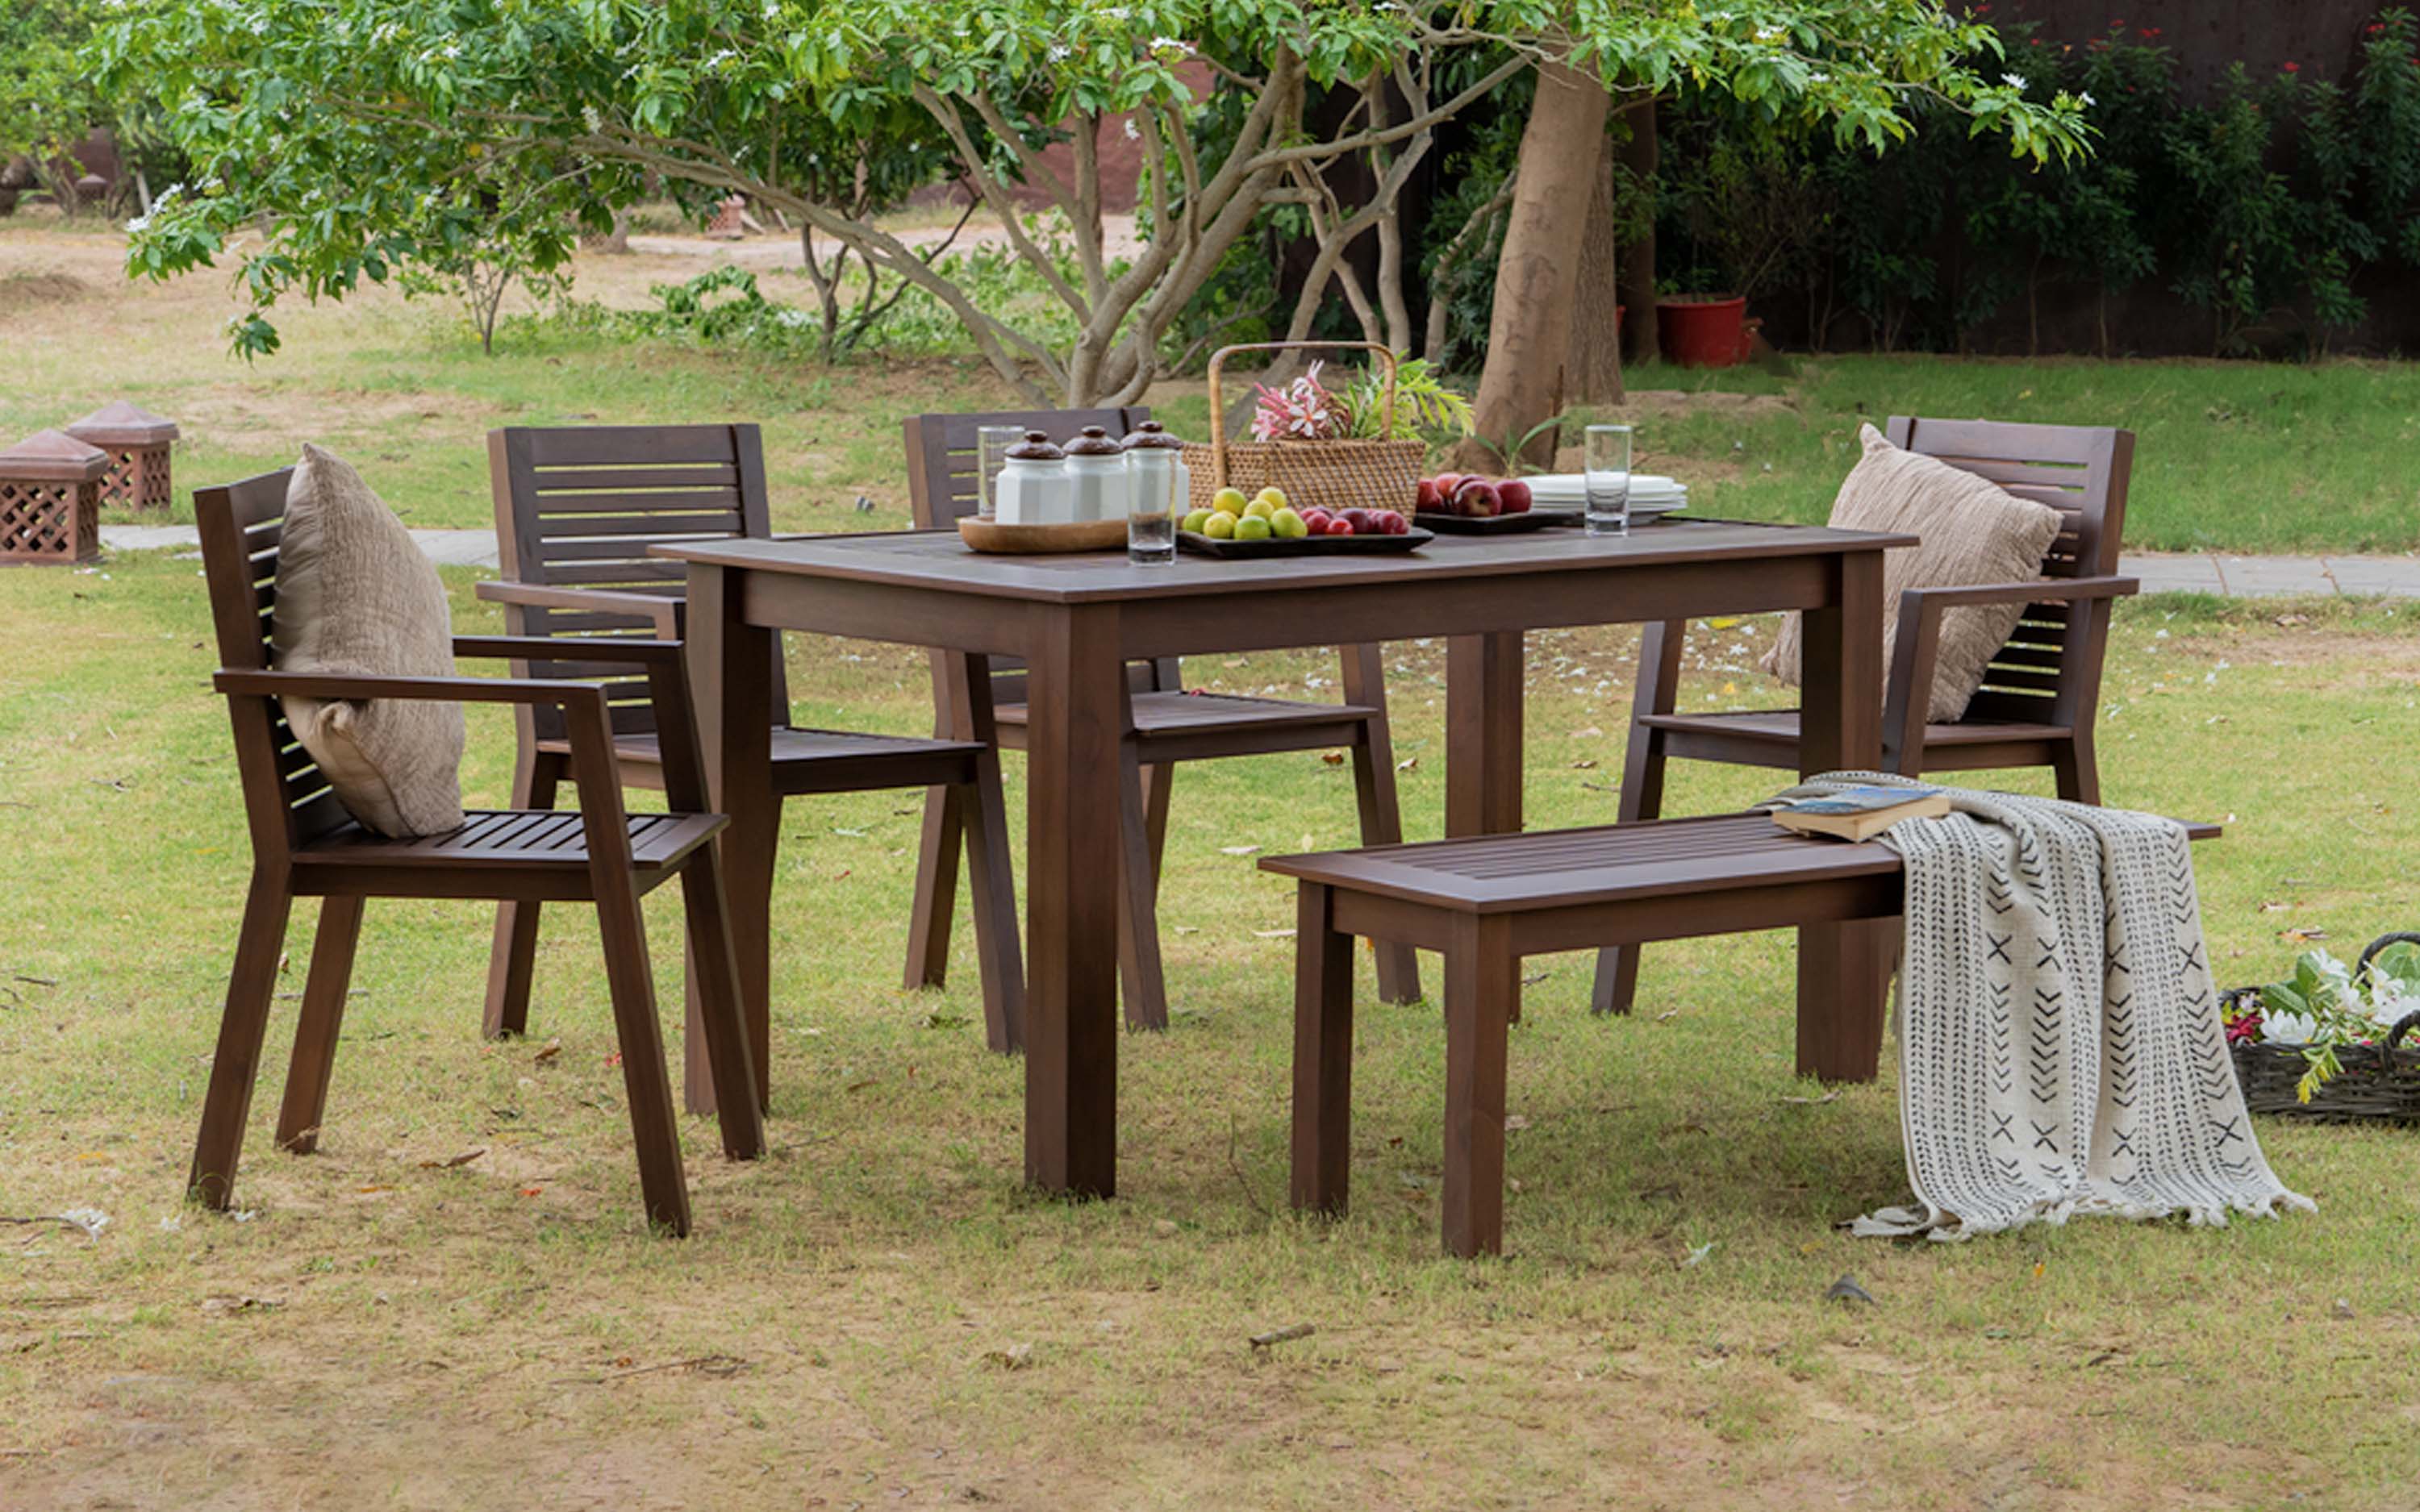 Alfresco Outdoor Dining Table Set. Unveil the ease of Stain-Free Furniture: Marvels that repel spills!